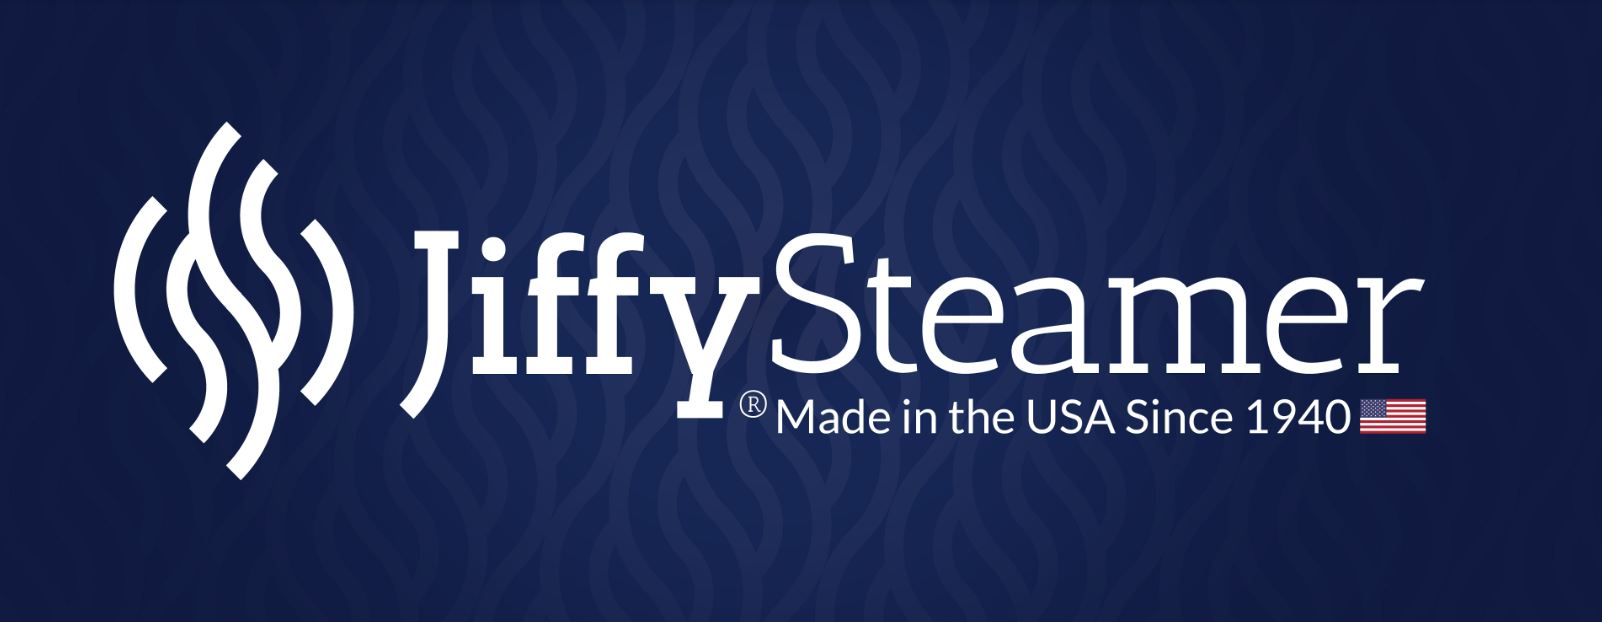 jiffysteamer_best_quality_steamer_for_clothes_europe_european_distribution_distributor